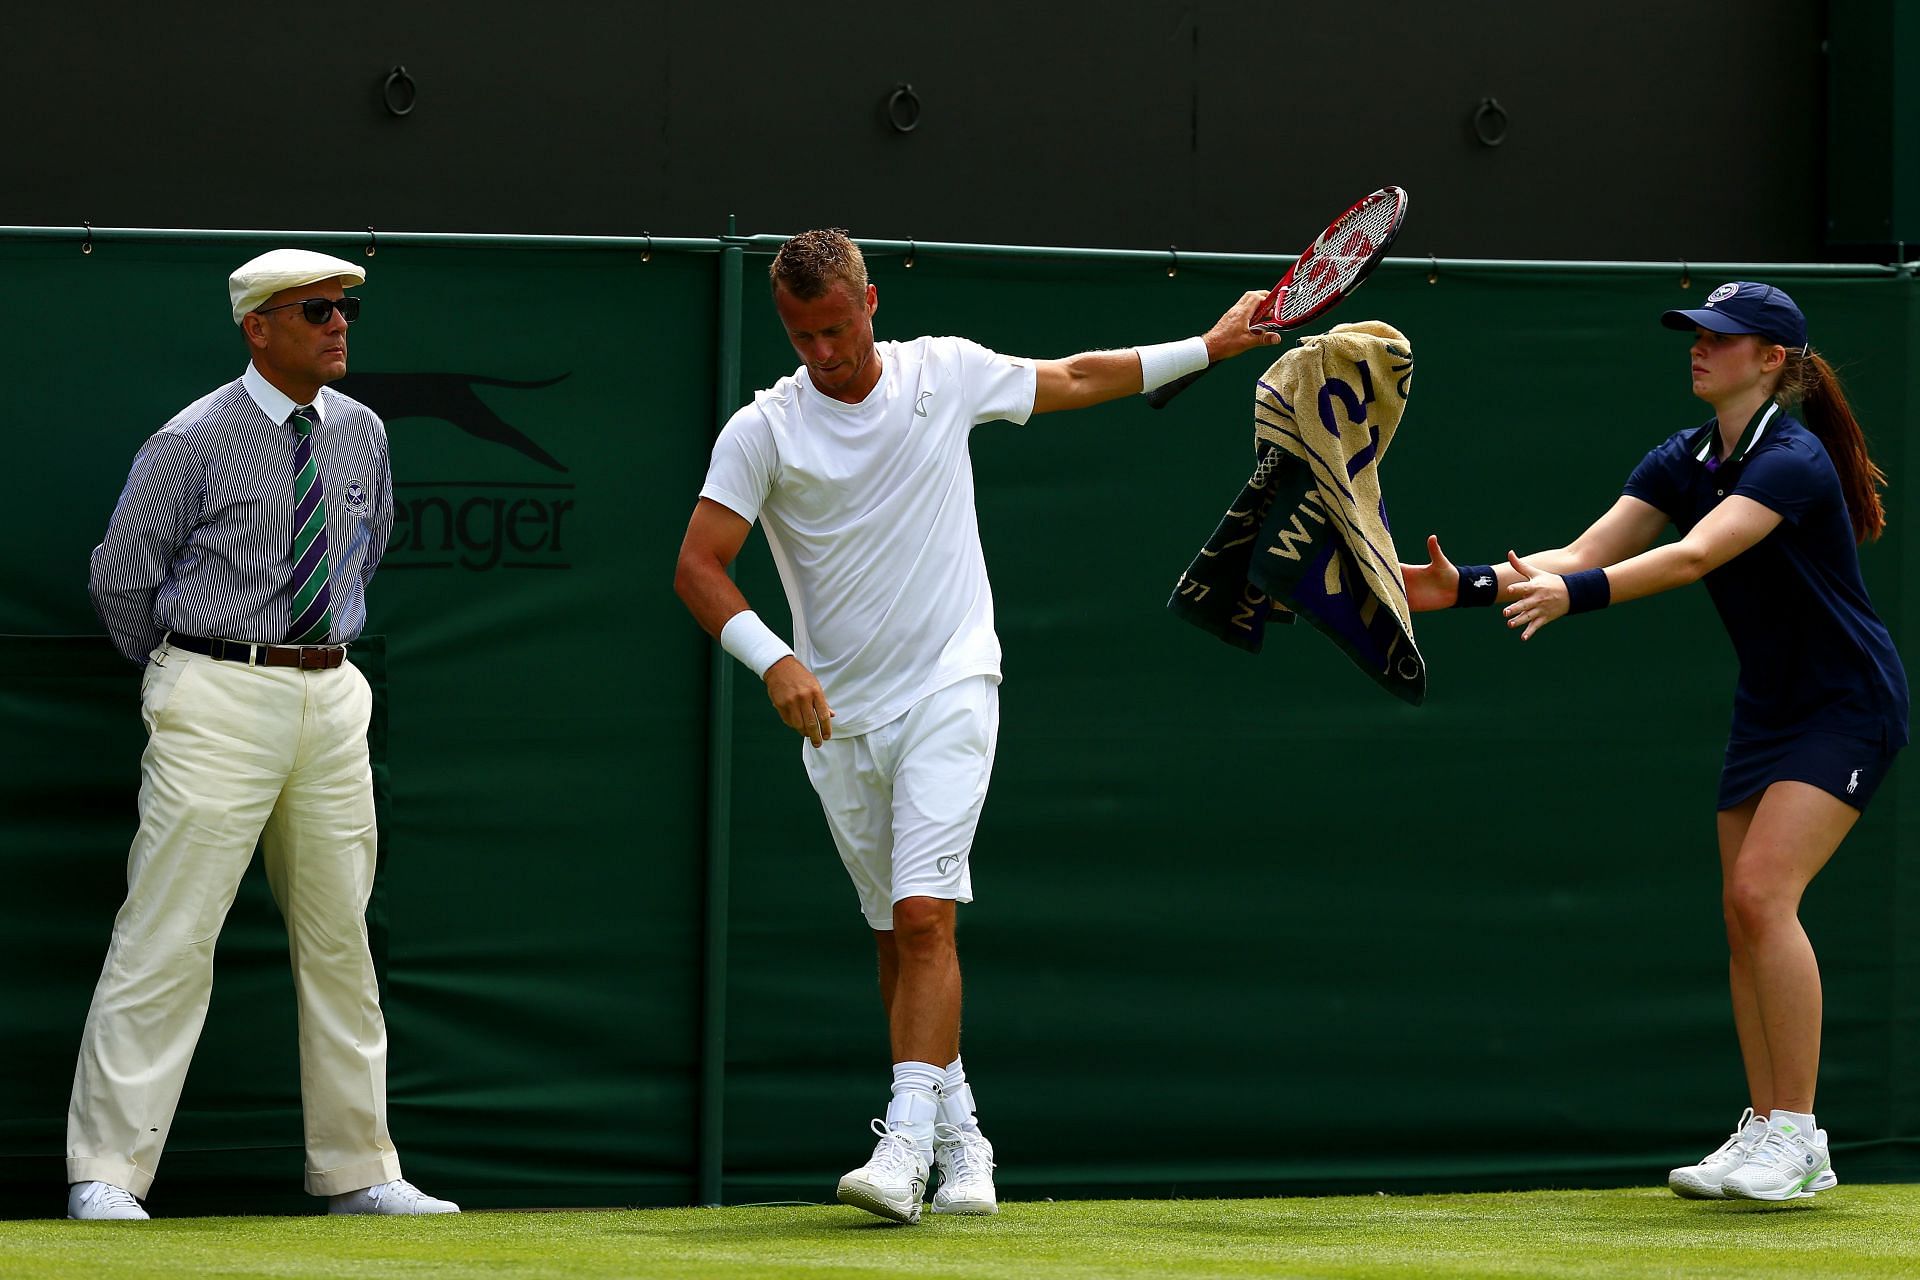 Lleyton Hewitt was the defending champion at the 2003 Wimbledon. (Photo: Getty)